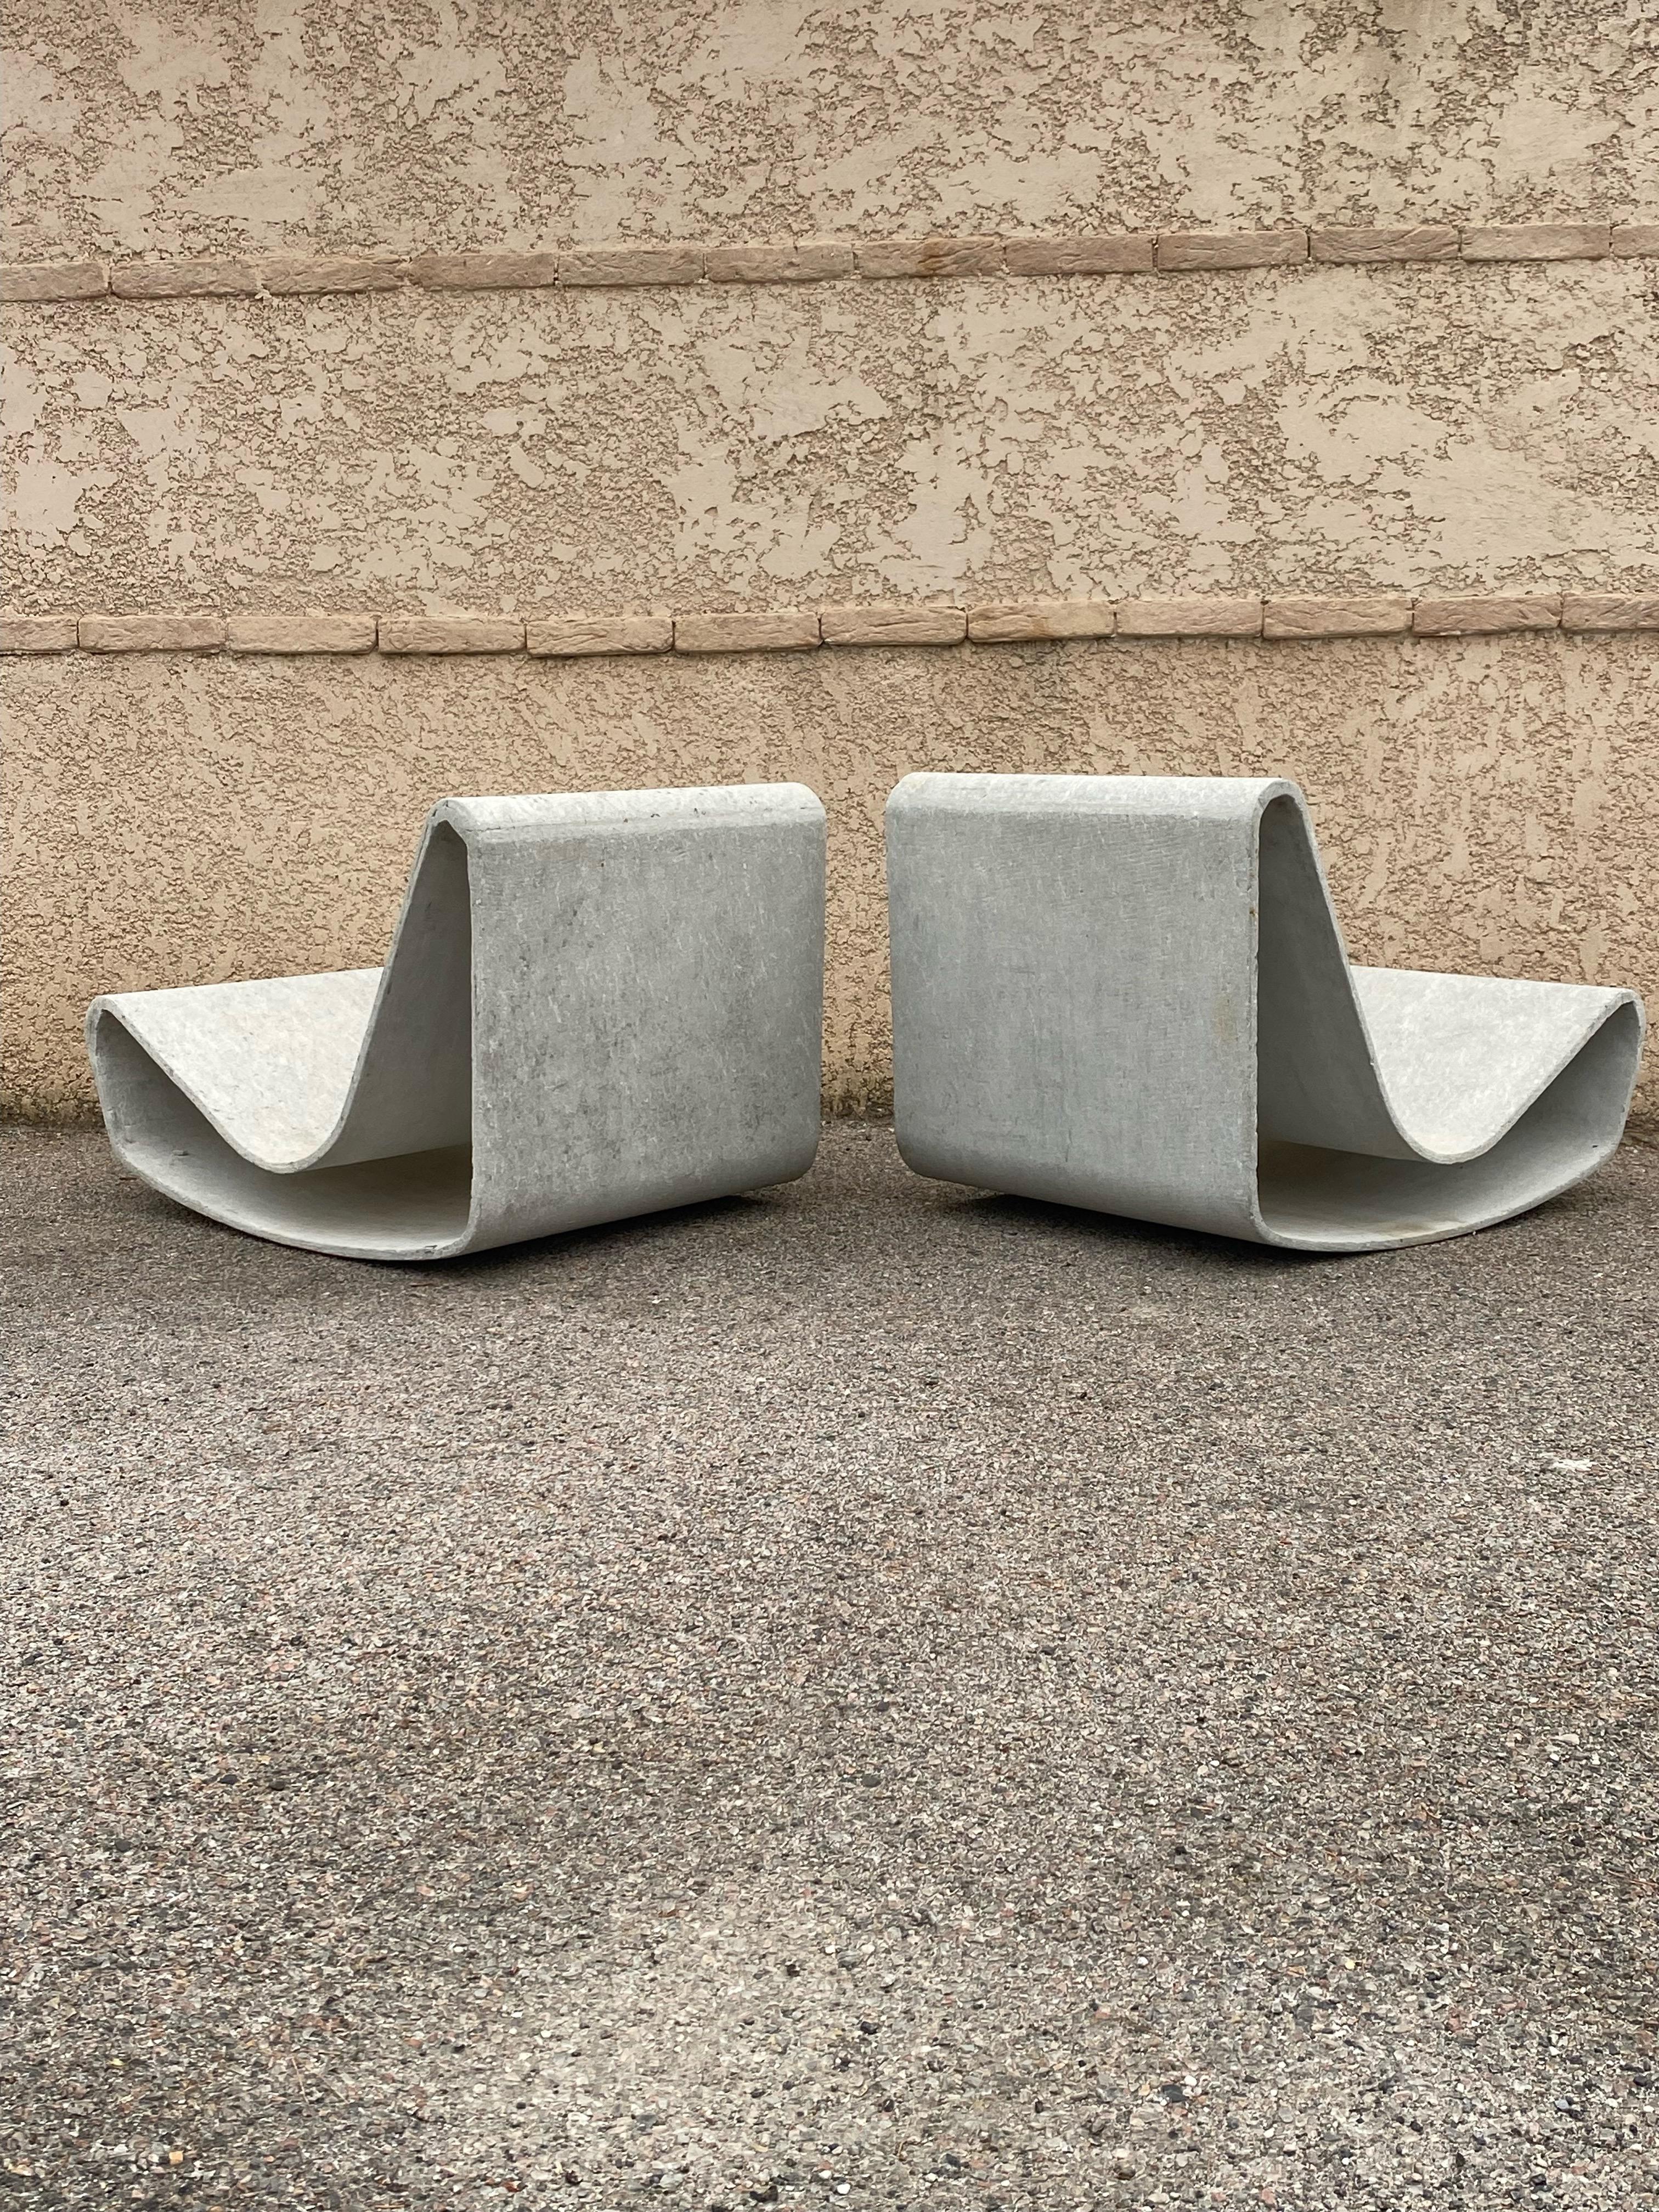 French Pair of Concrete Loop Chair Design by Willy Guhl, 1960s For Sale